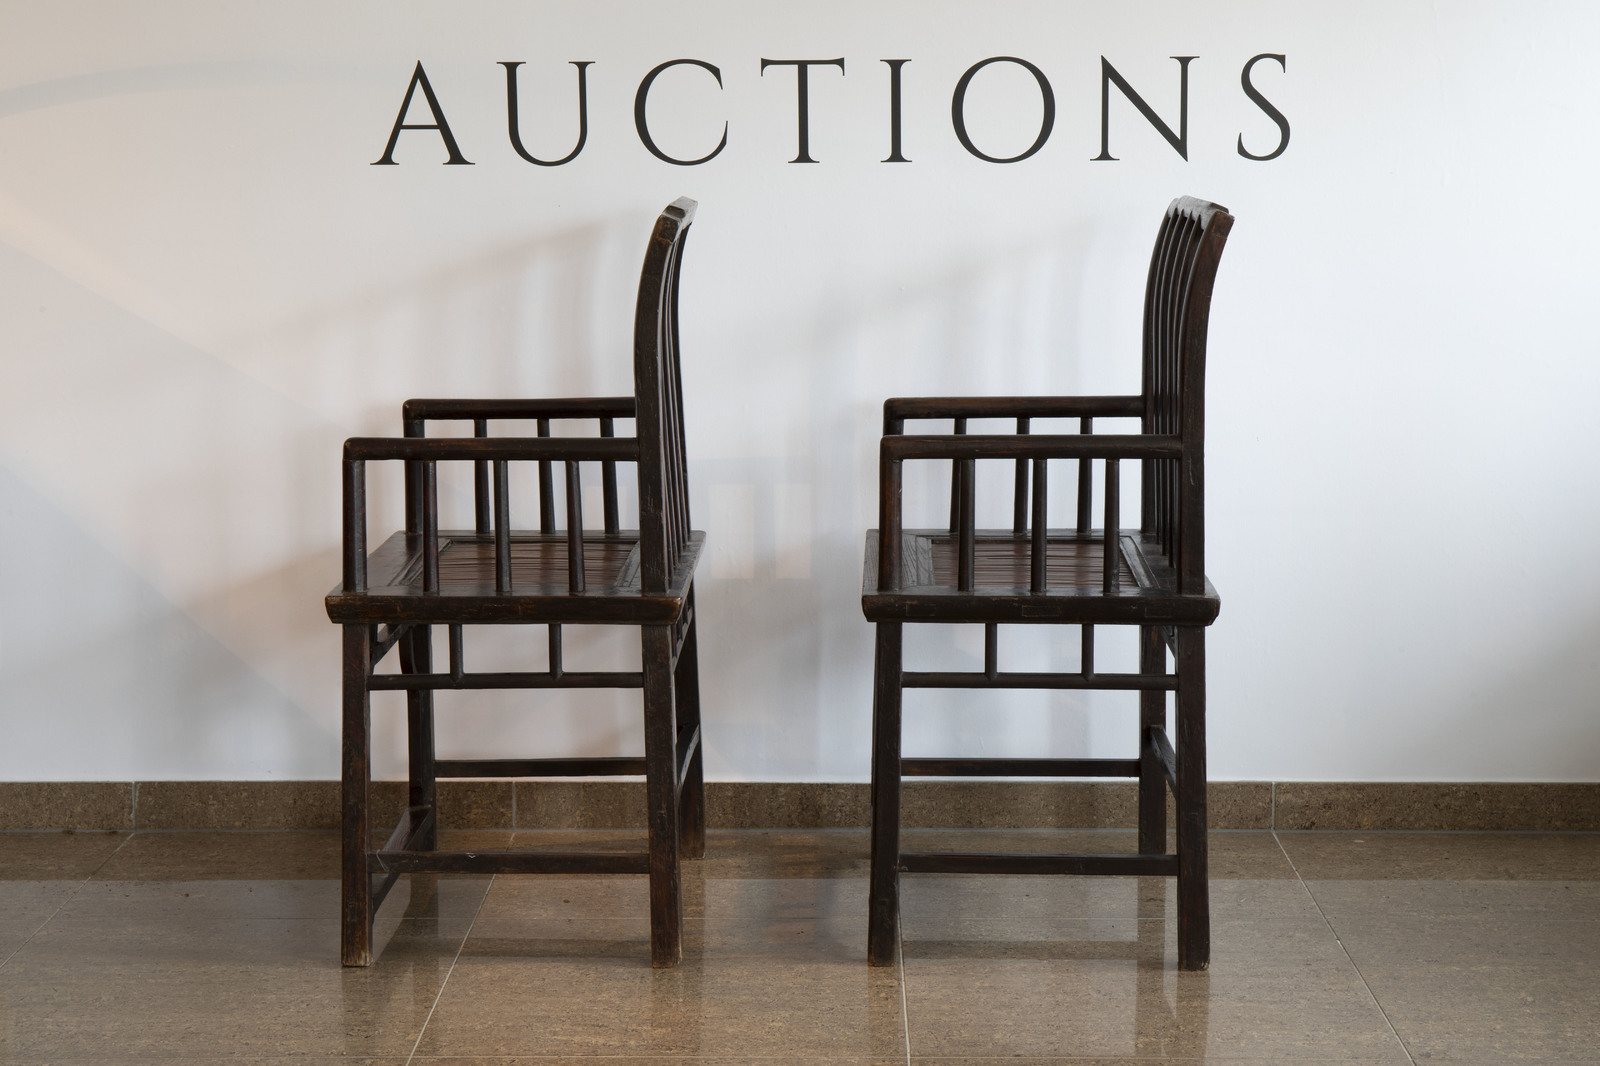 A pair of Chinese lacquered wooden chairs, first half of the 20th C. - Image 5 of 7